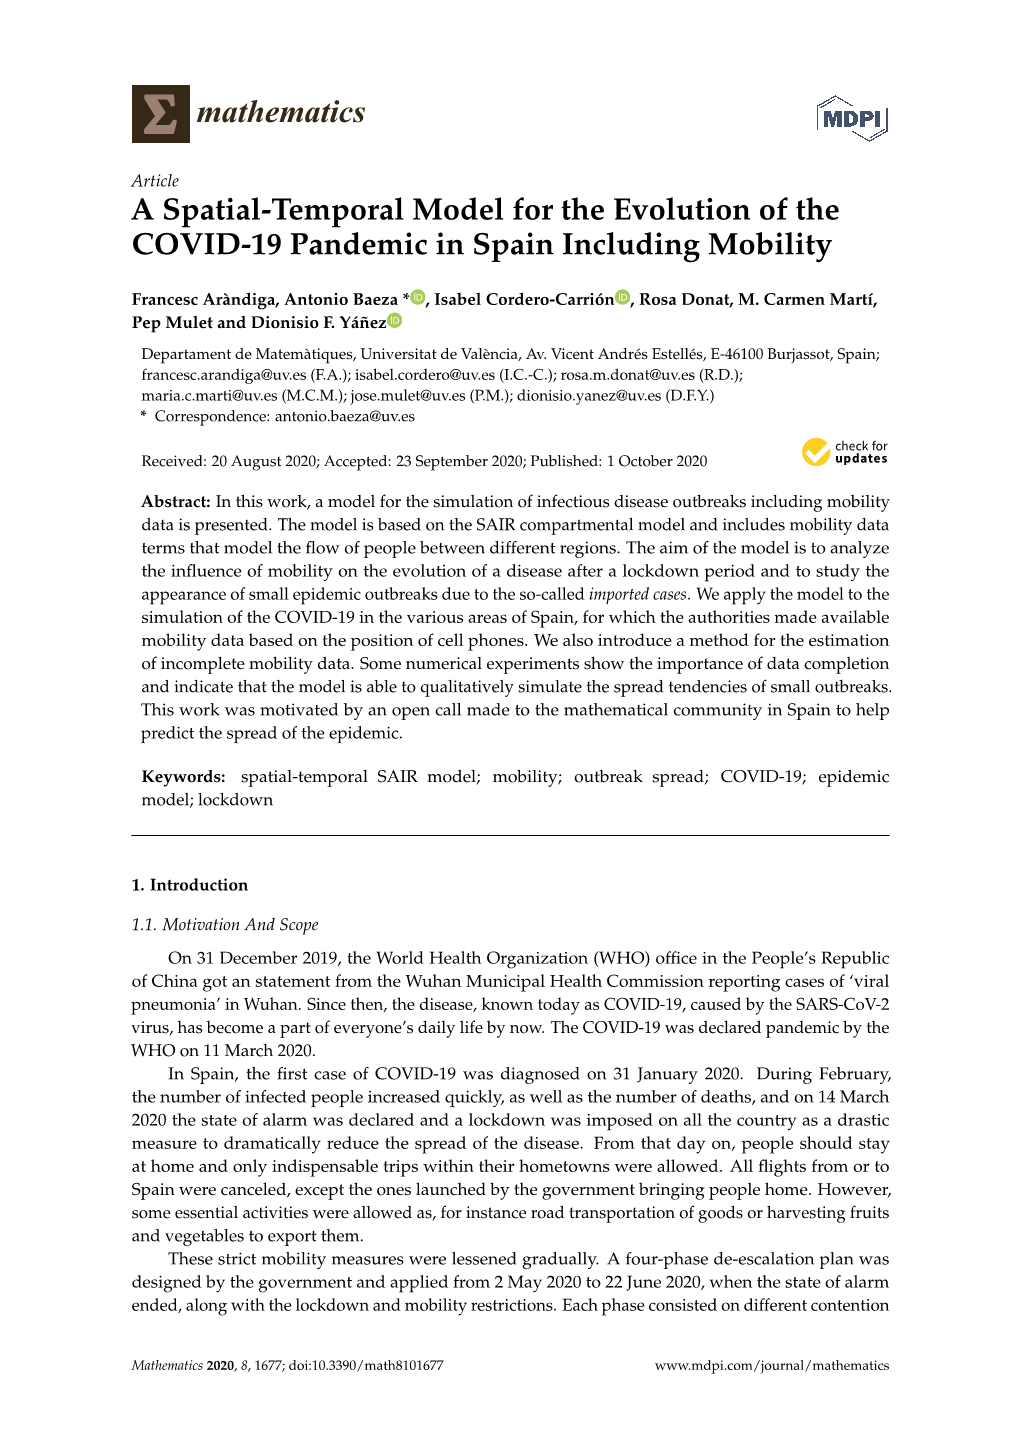 A Spatial-Temporal Model for the Evolution of the COVID-19 Pandemic in Spain Including Mobility